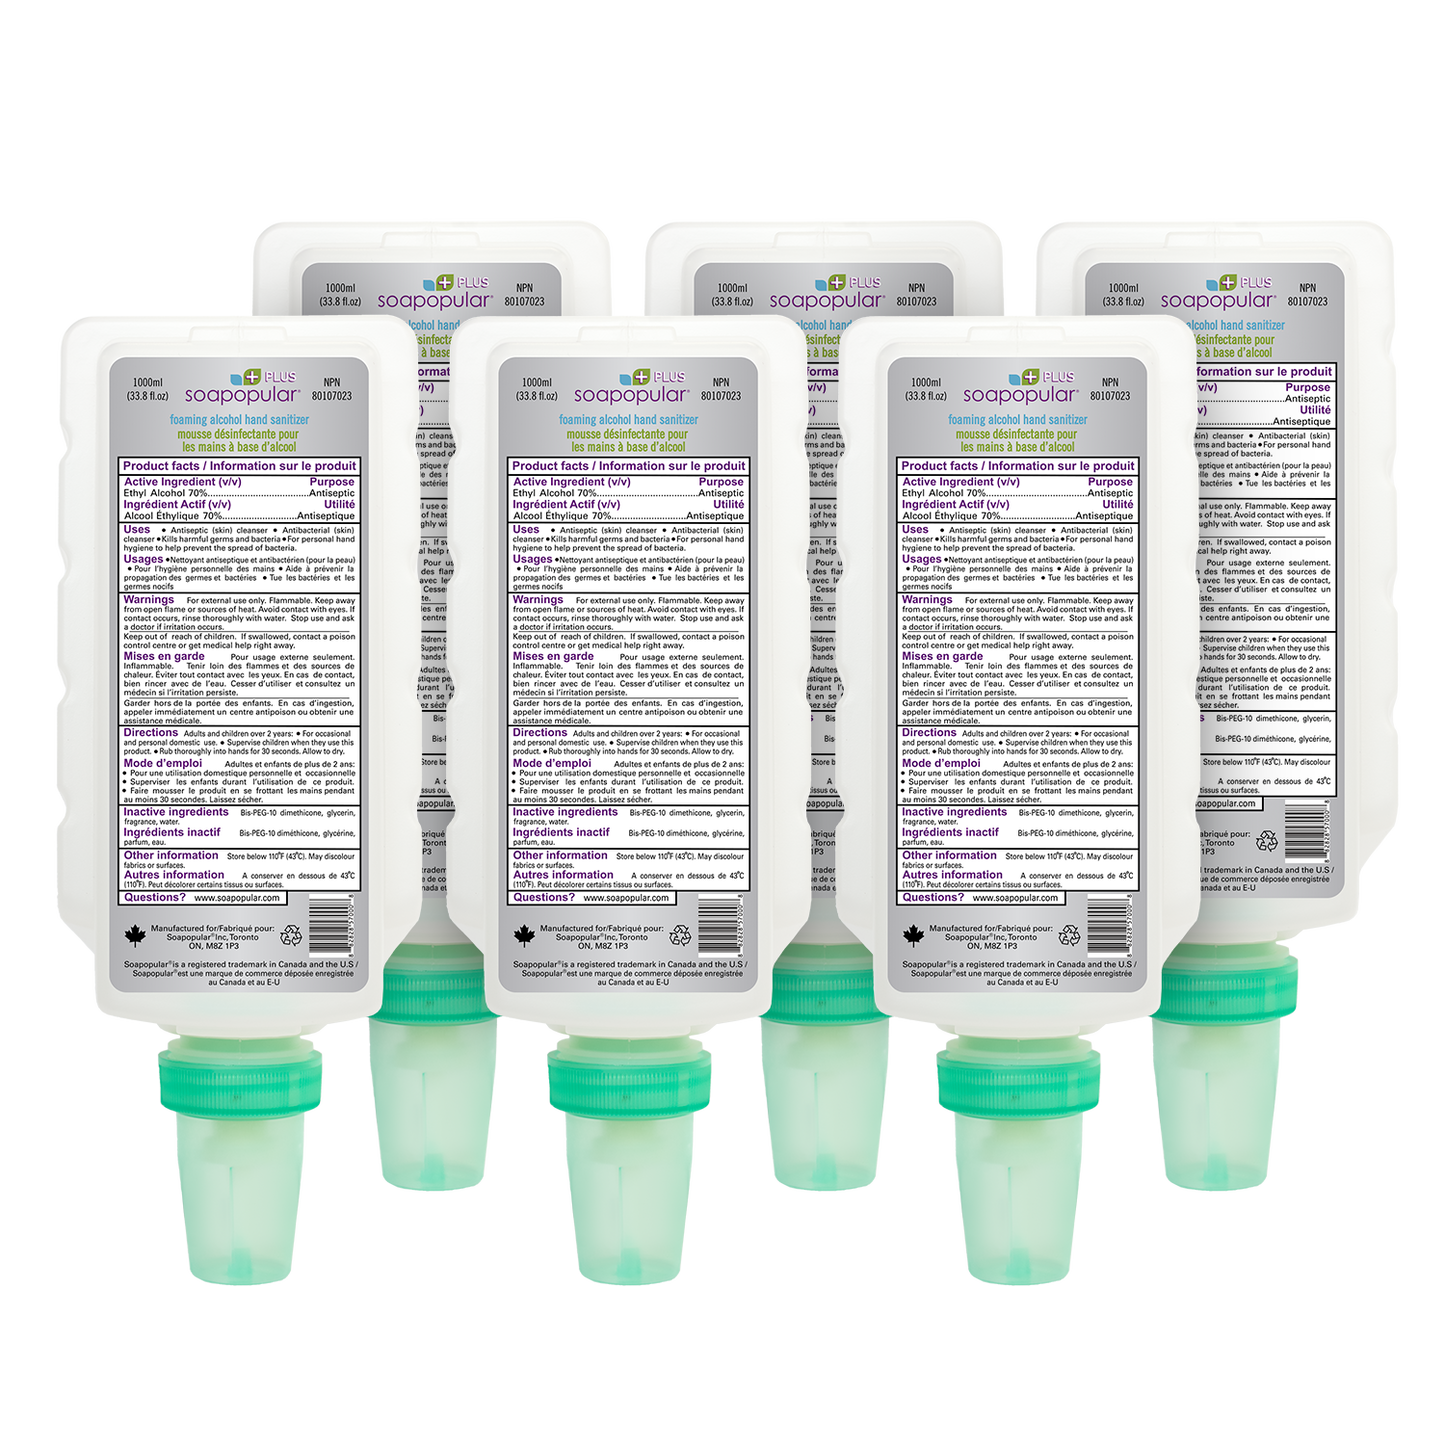 PROMOTION*  Soapopular Plus® 70% Alcohol Foam Hand Sanitizer 1 L Cartridge Refill (6PK)  &  Receive 1 FREE  Wall Covered Dispenser